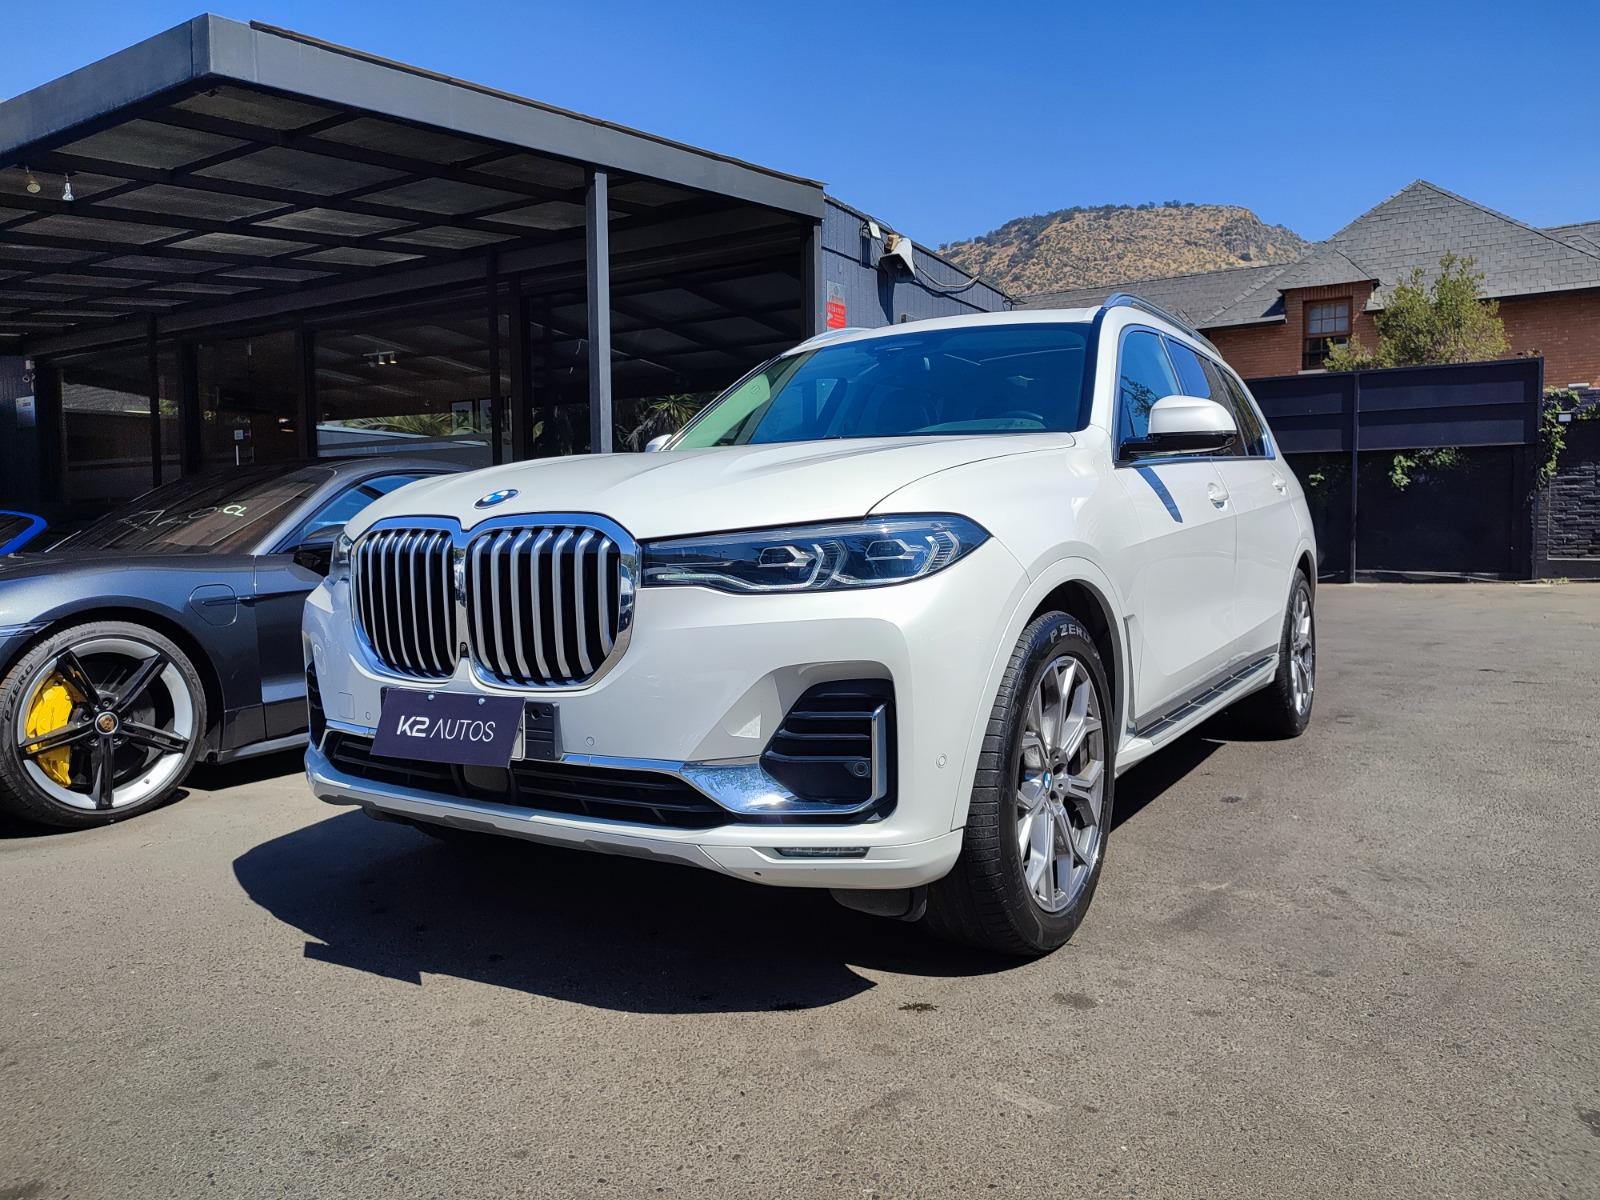 BMW X7 XDRIVE 40i M 2020 MAXIMO EQUIPO, IMPECABLE - 